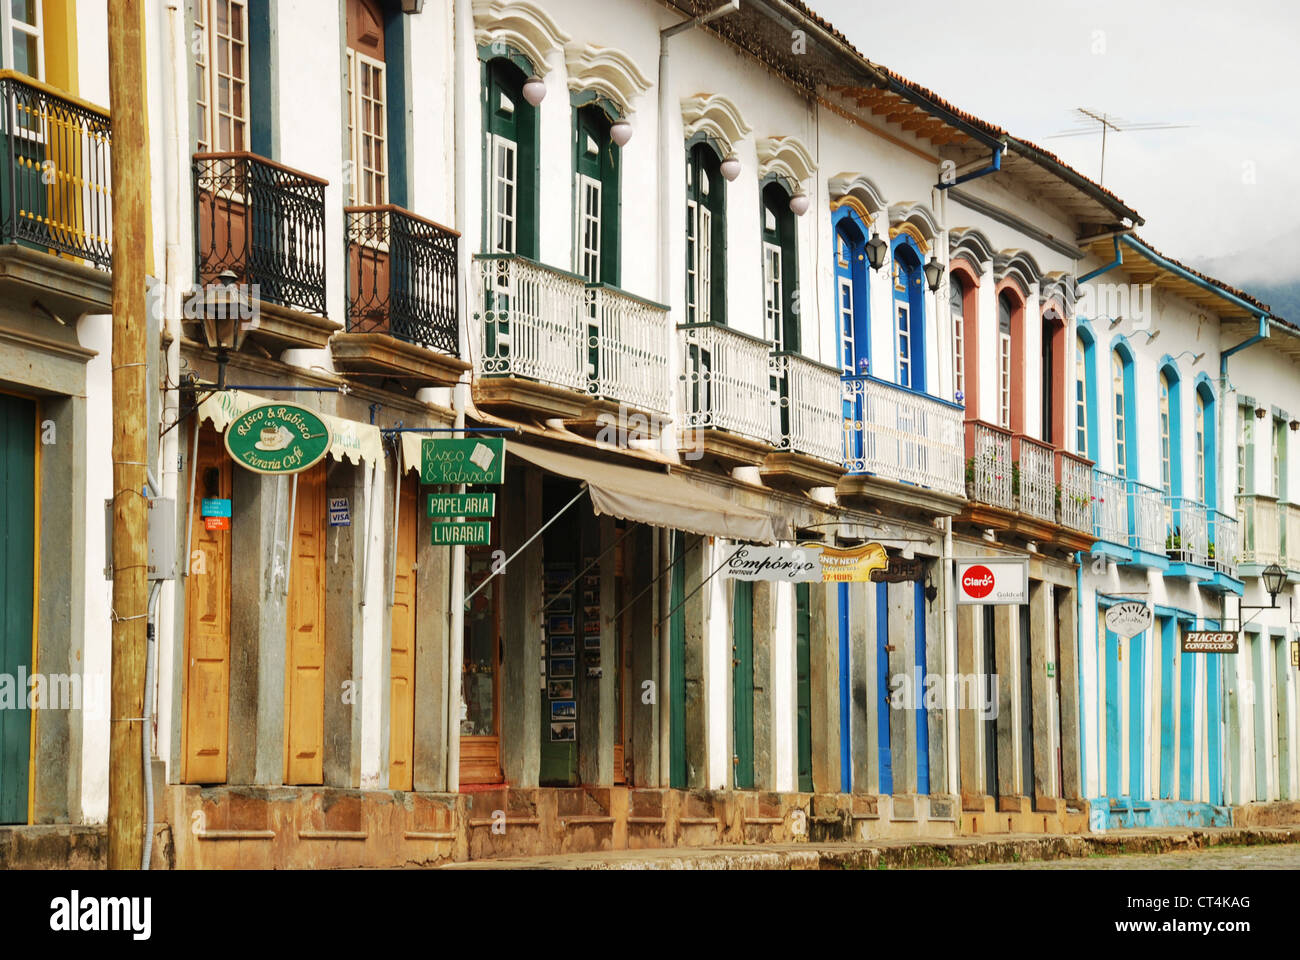 Brazil, Minas Gerais, Mariana, street with colorful colonial residential buildings Stock Photo